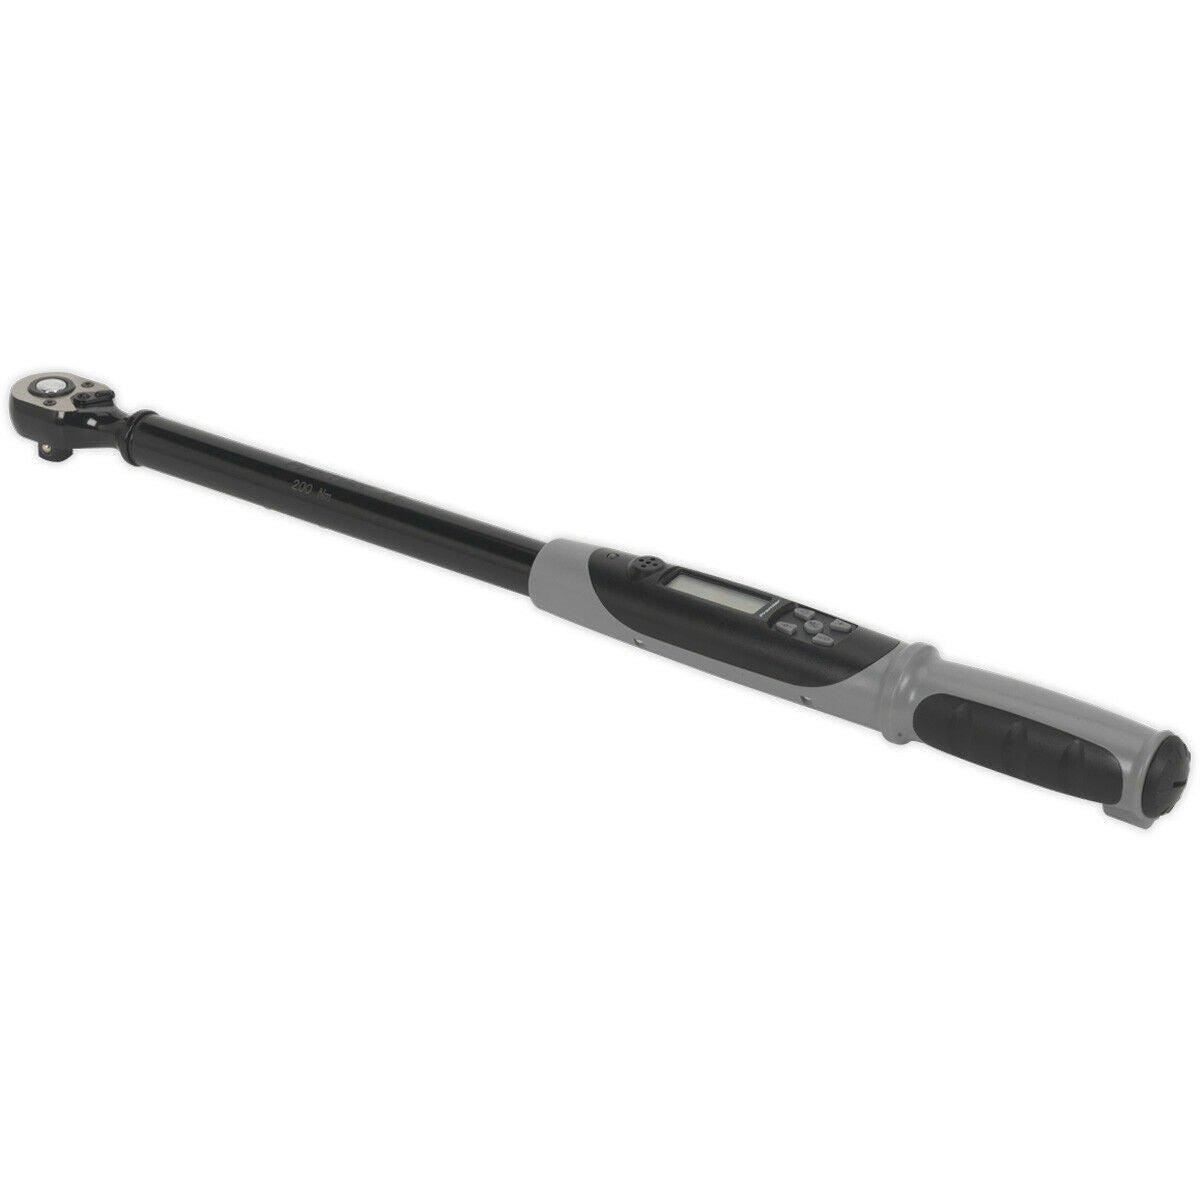 20 to 200Nm Digital Torque Wrench & Angle Function - 1/2